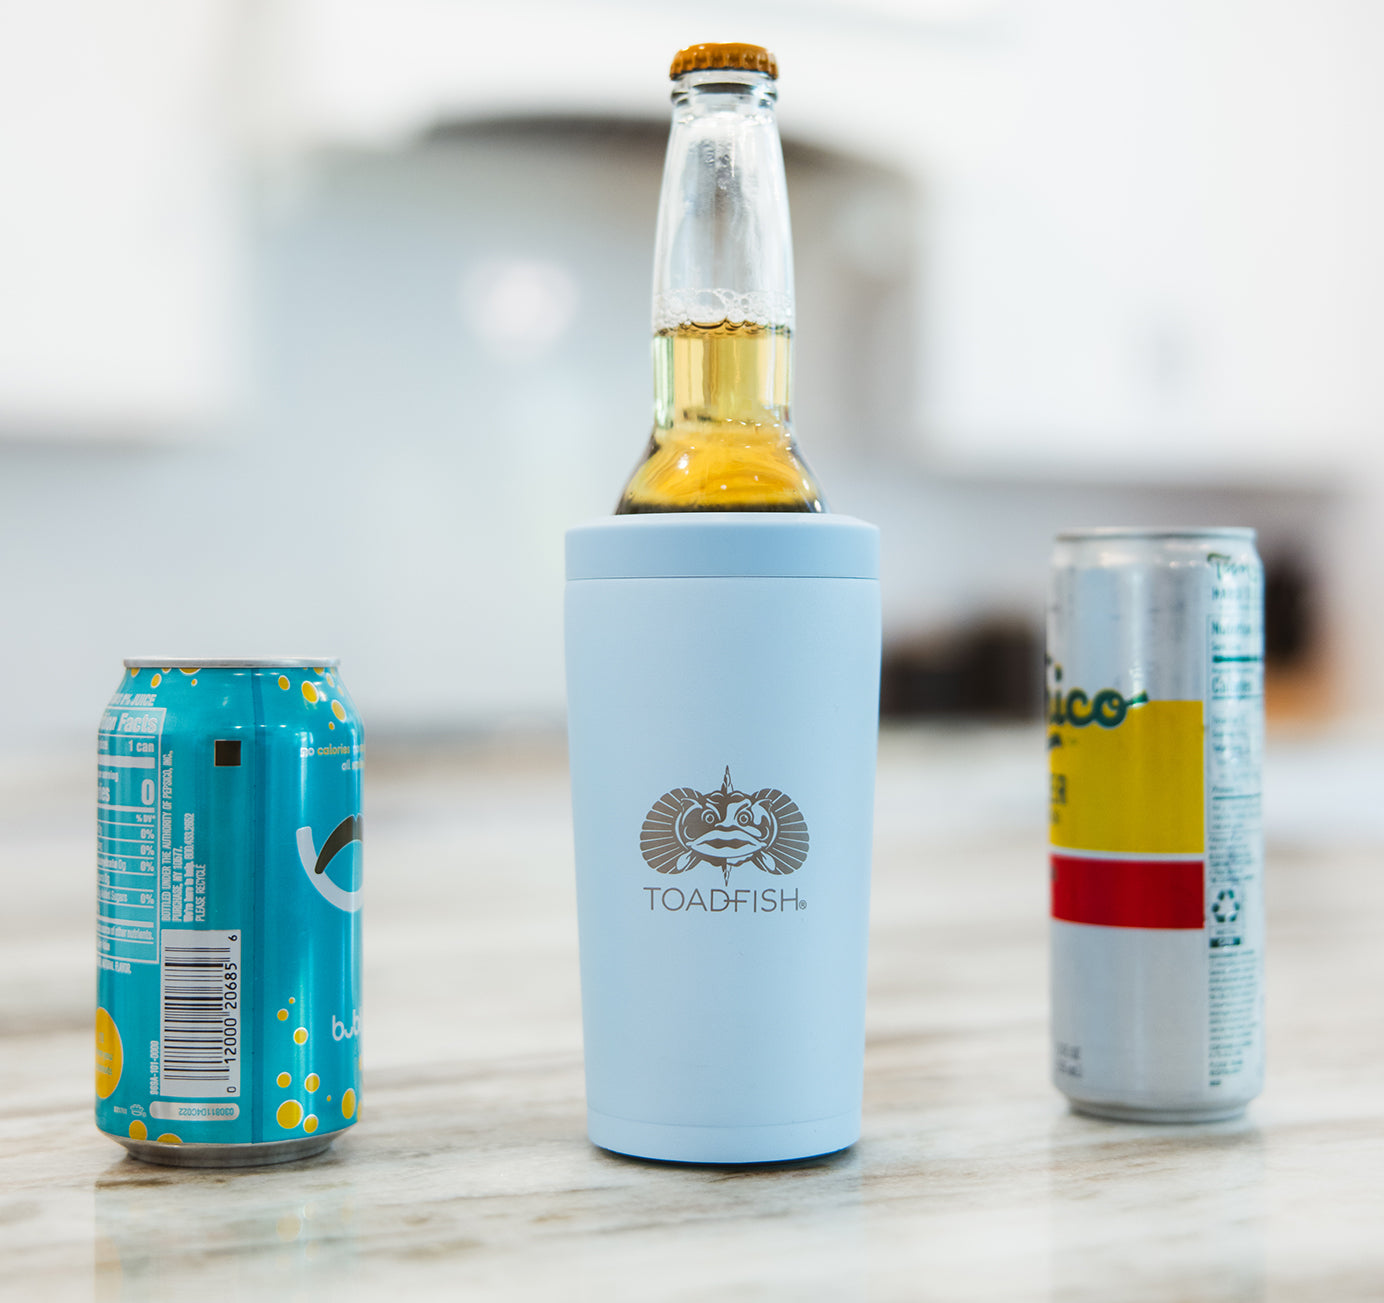 Universal Can Cooler